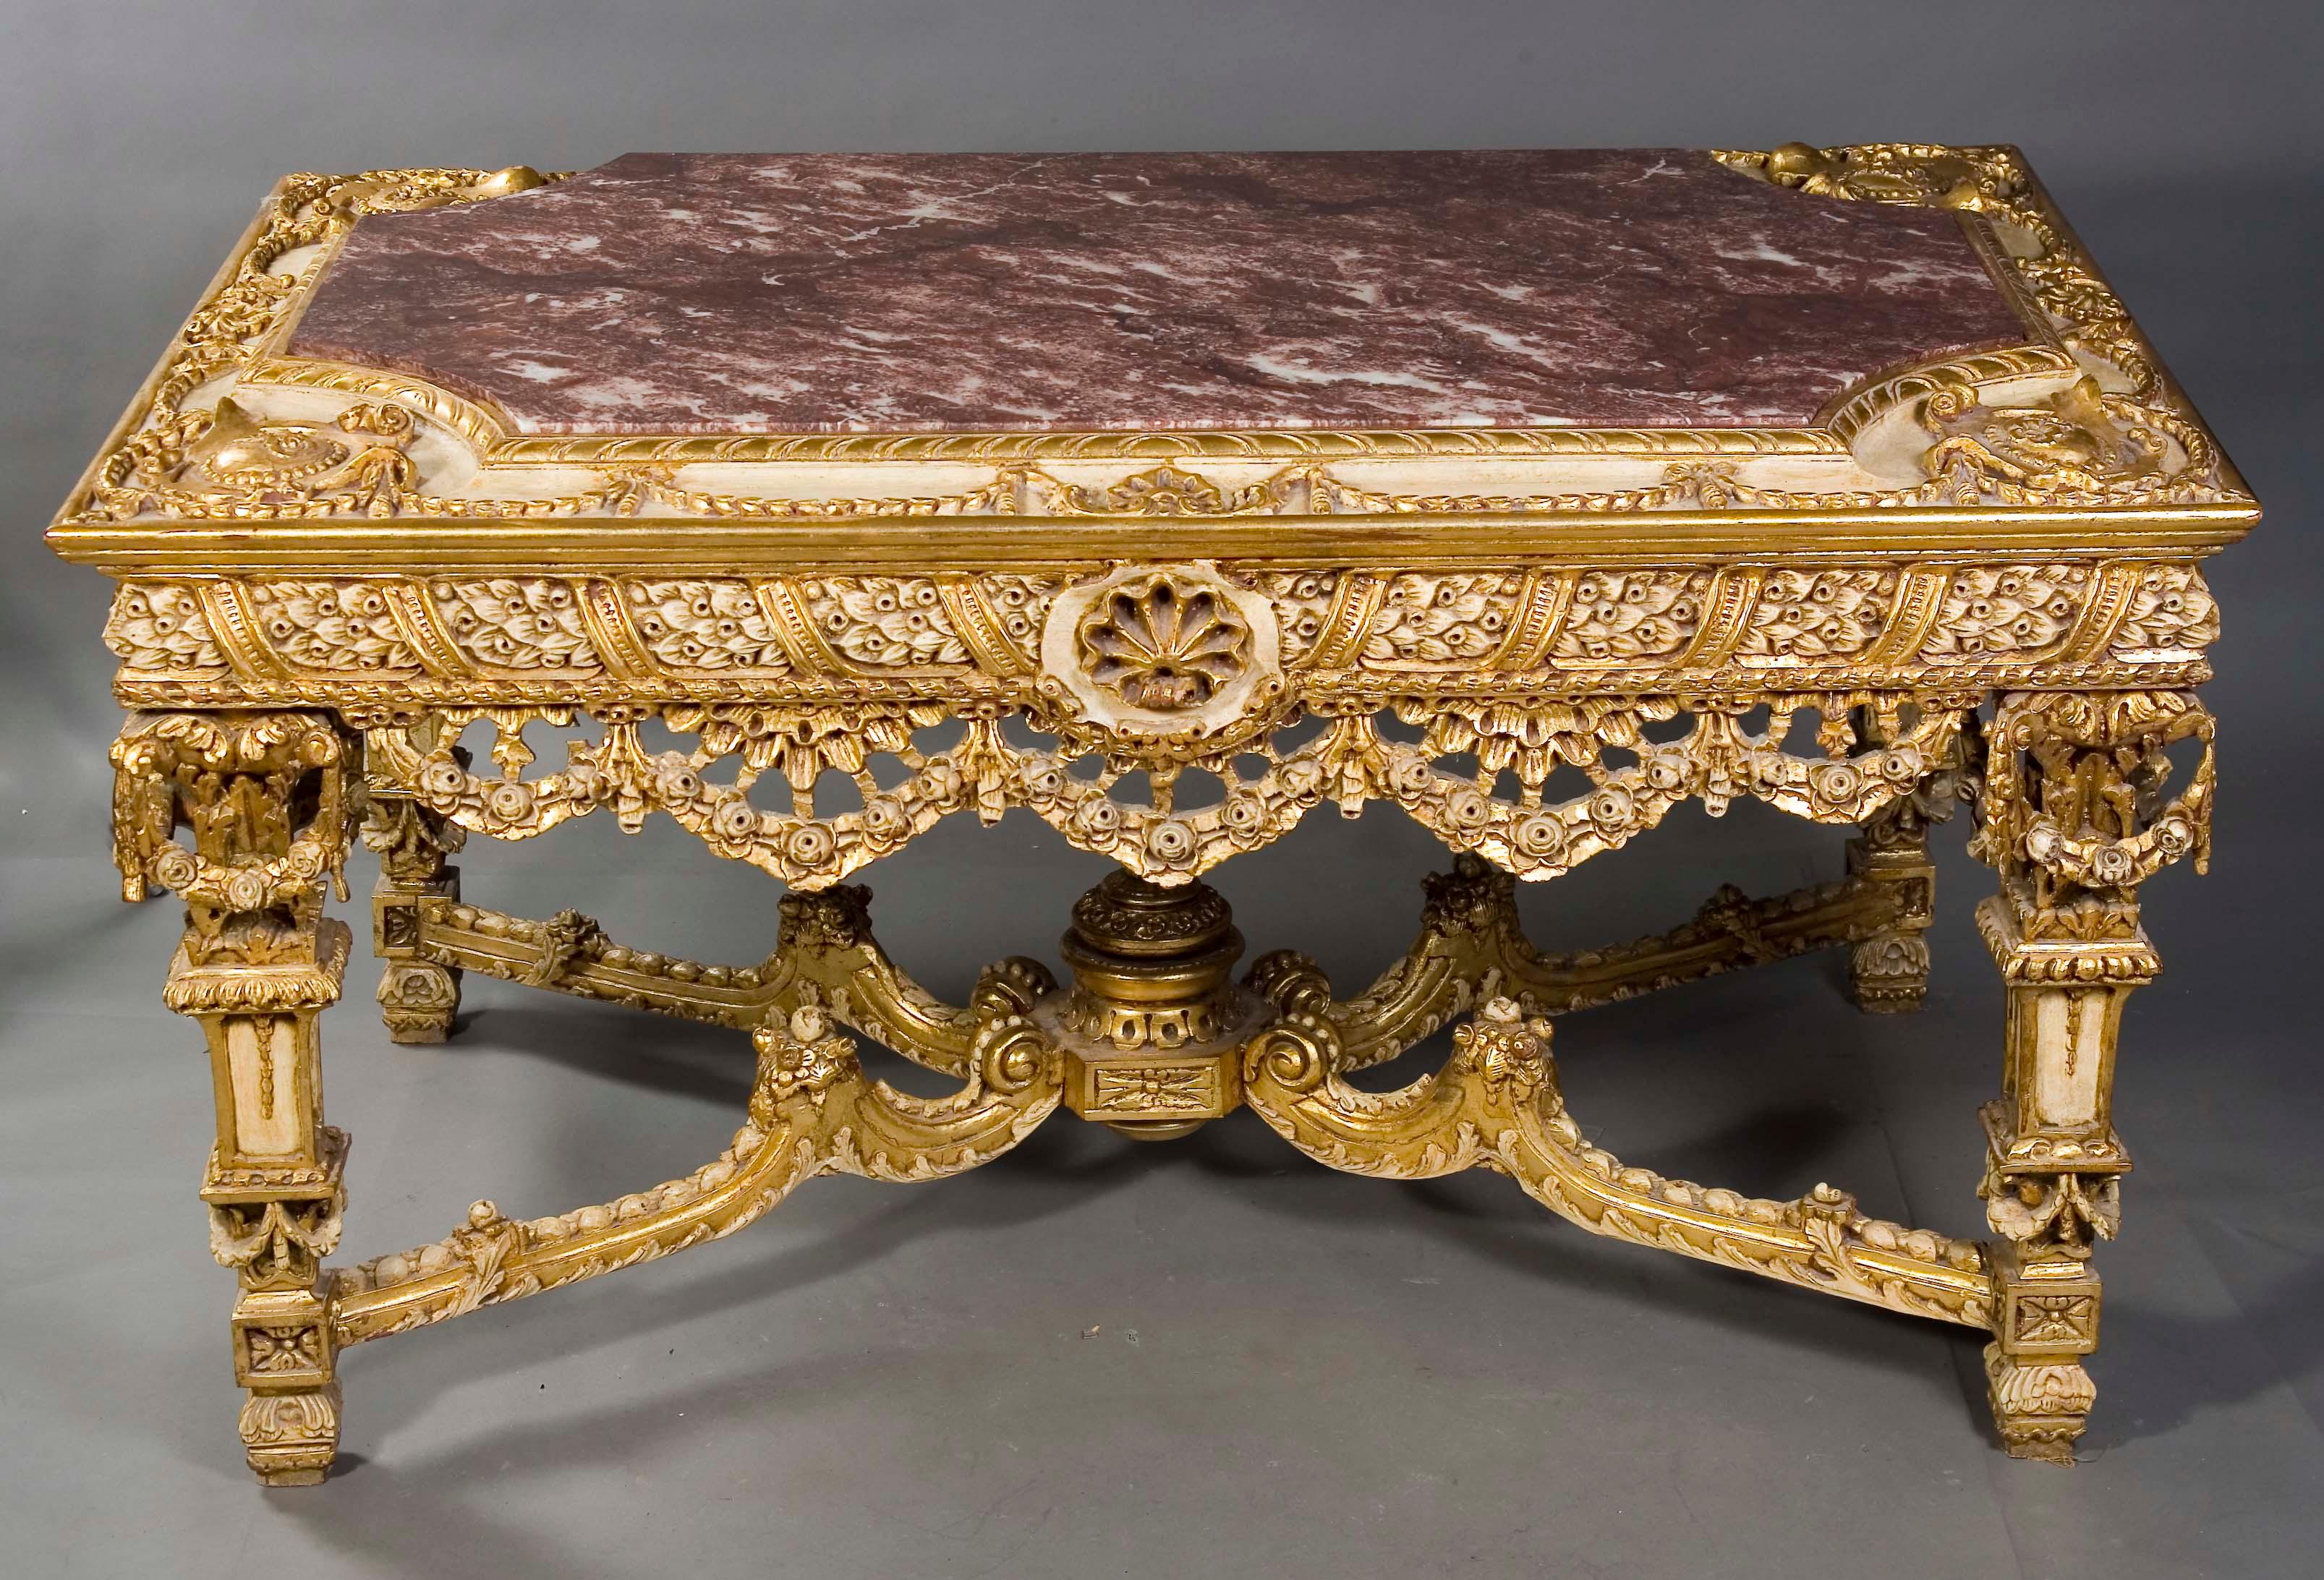 Monumental, impressive Splendid-Salon-Table in Louis XVI Style
Highly valuable solid Beech Wood, carved in the finest detail. Beige
colored handpainted and gilded. On conical shaped, carved legs, joined with X-formed, strongly carved wooden middle